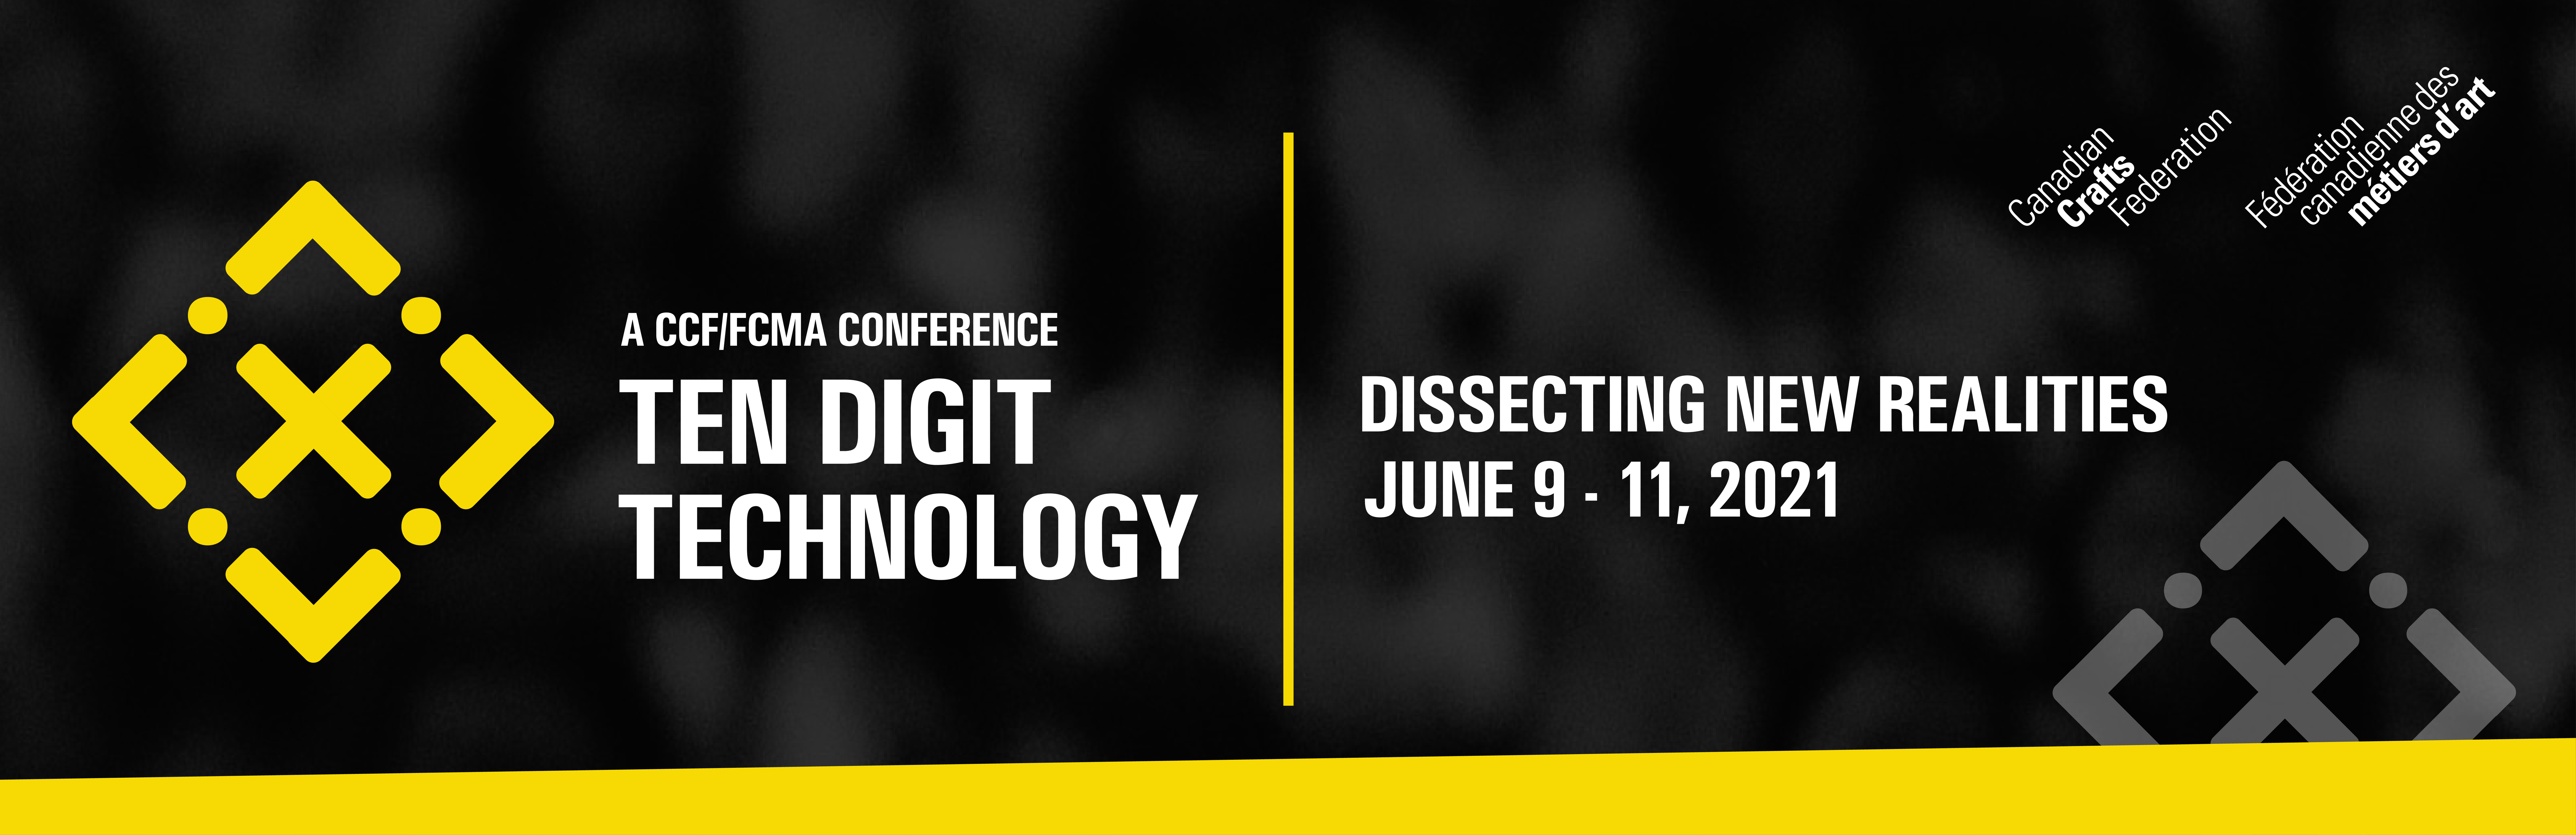 Dissecting New Realities Conference